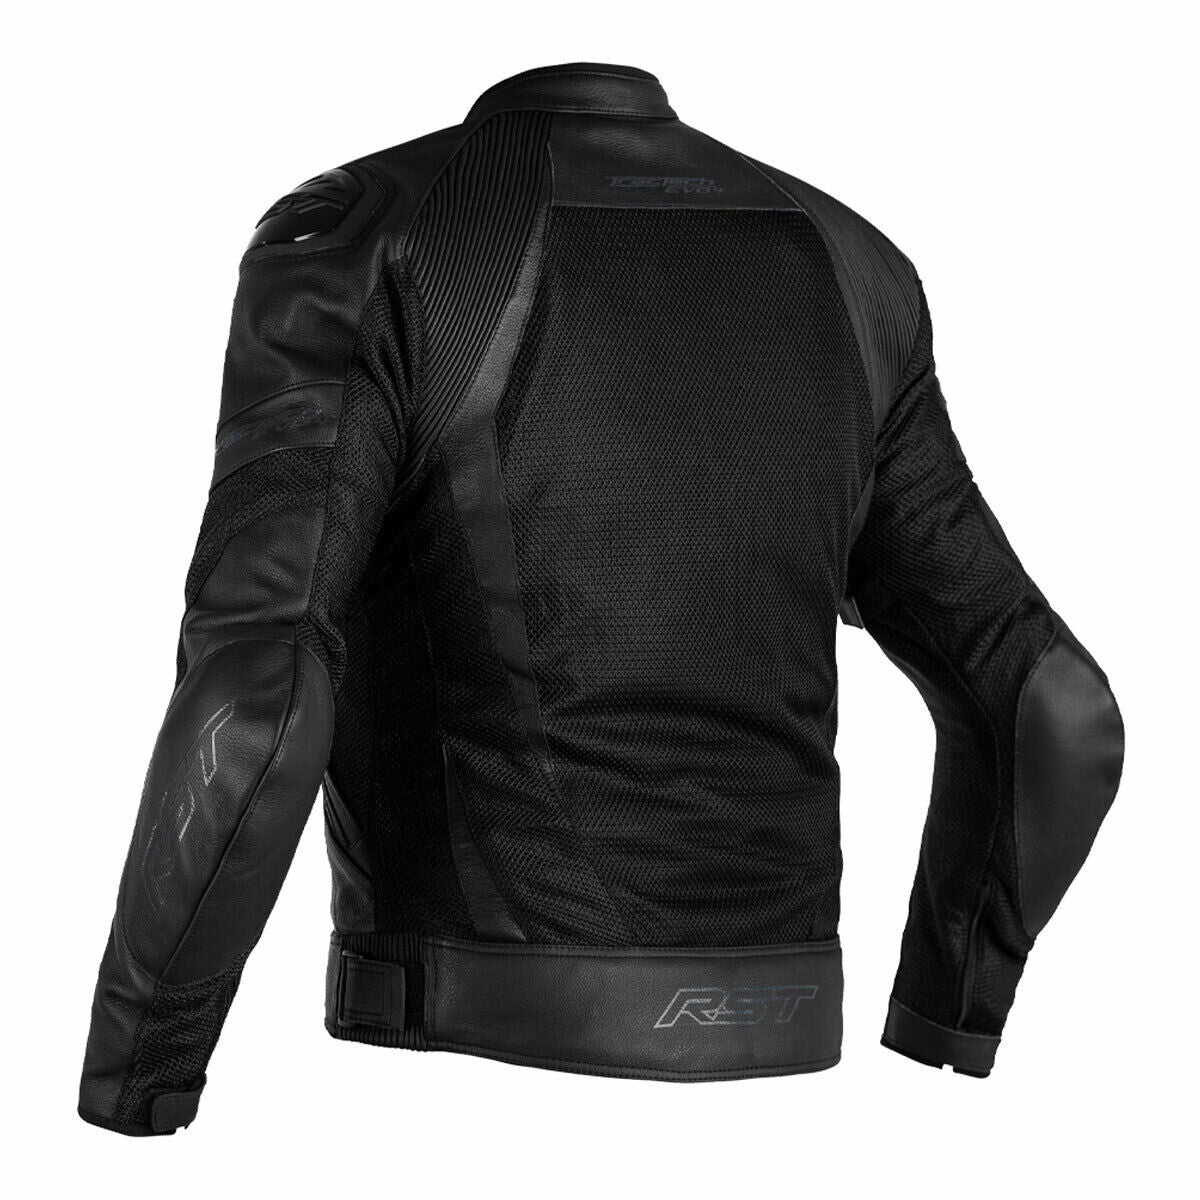 TRACTECH EVO 4 LEATHER MESH CE MENS LEATHER JACKET - BLACK